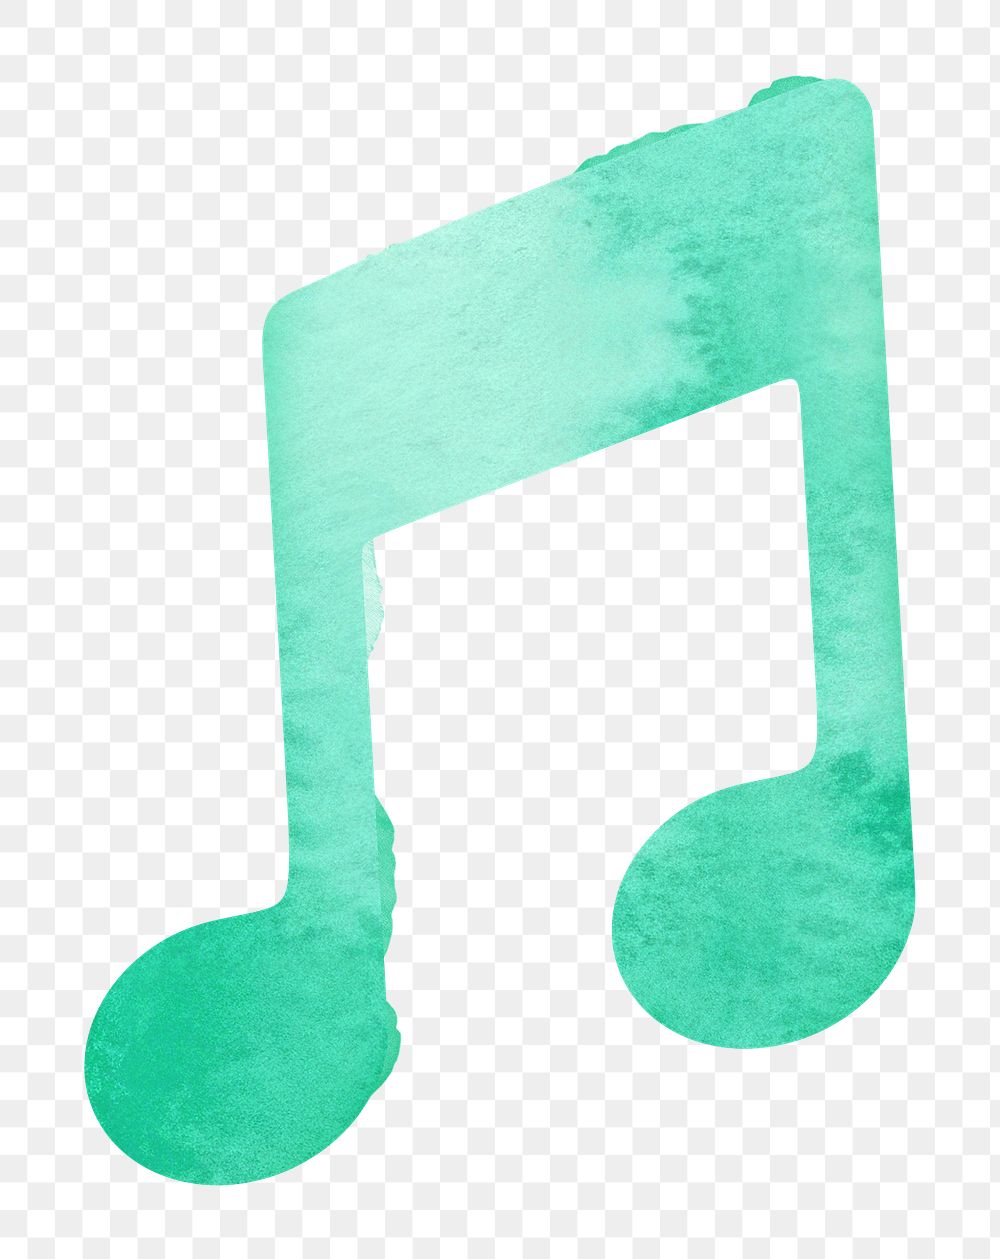 Green music note png watercolor illustration, transparent background